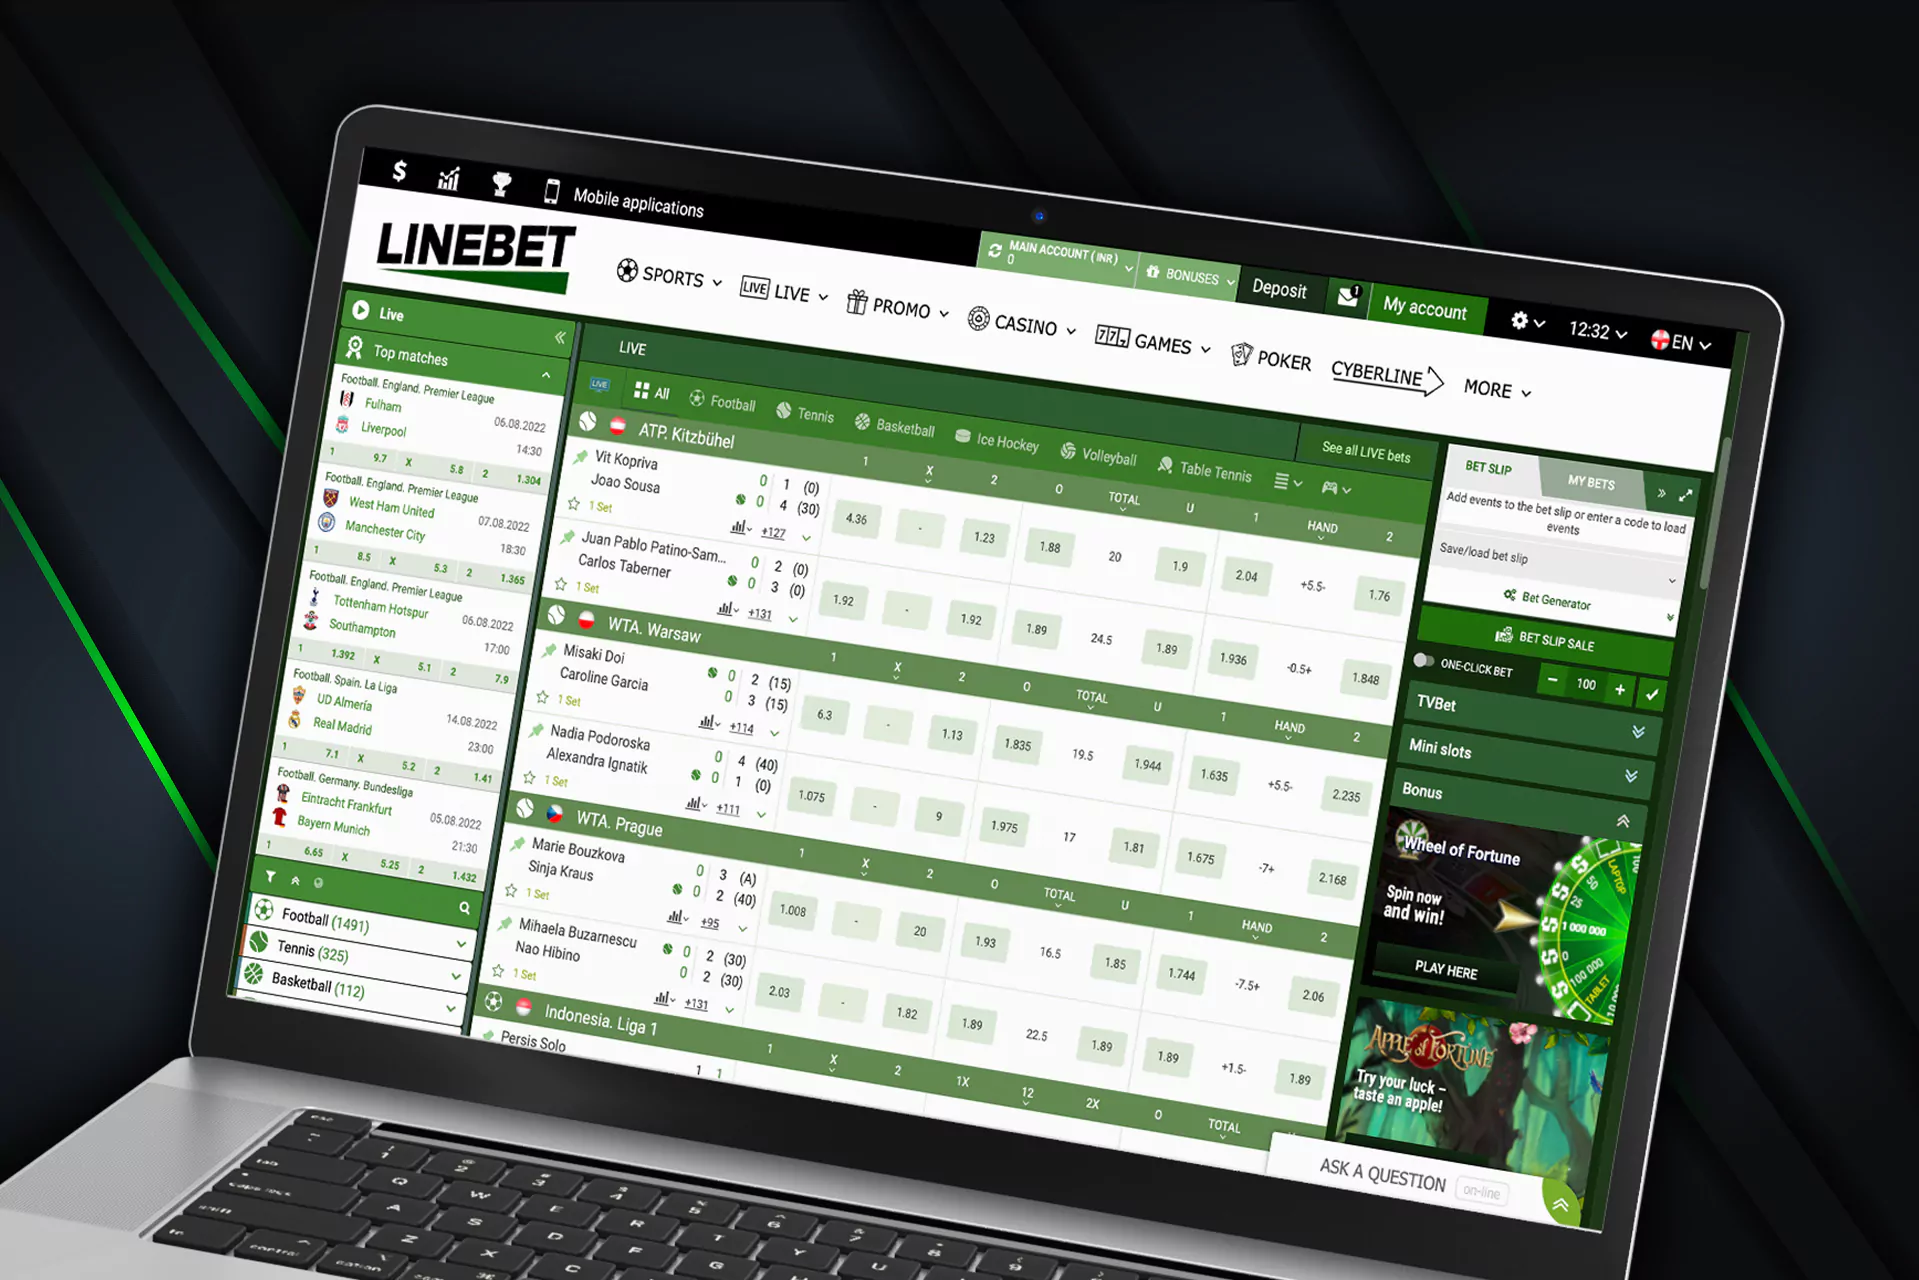 There is the Linebet desktop version for PC.